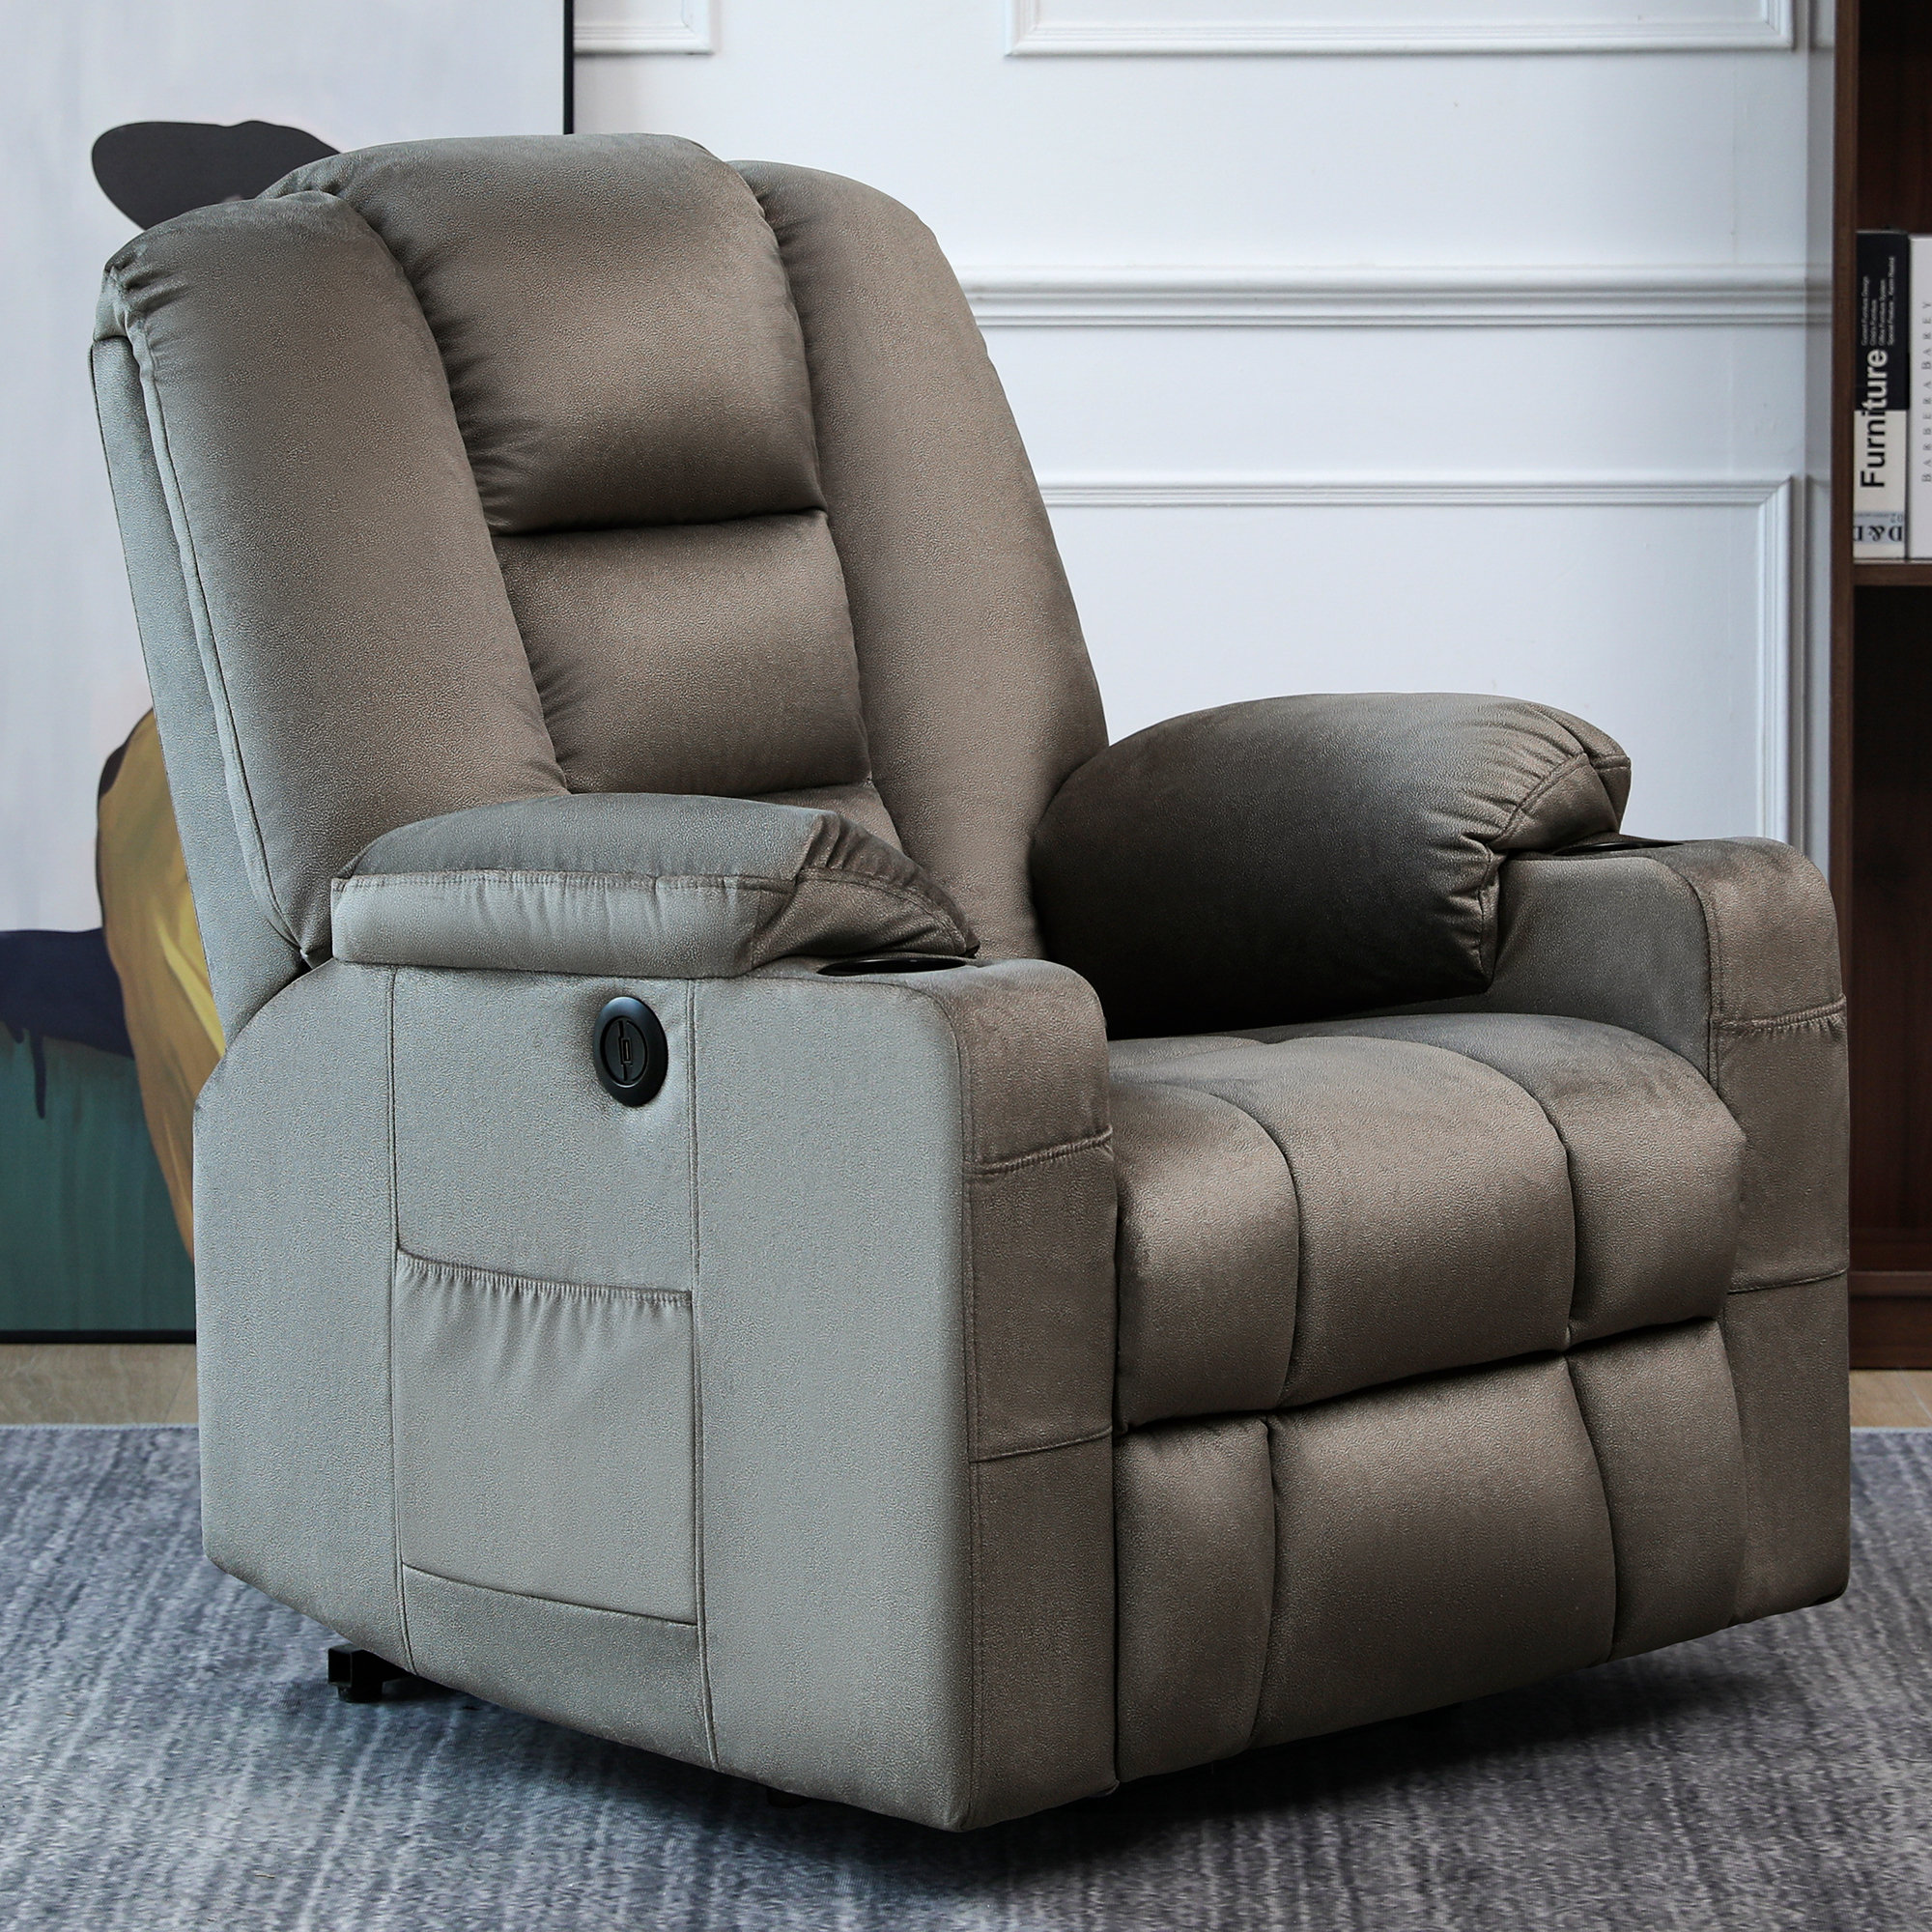 Recliner Chairs  Lift Chairs - Recliners For Less Canada